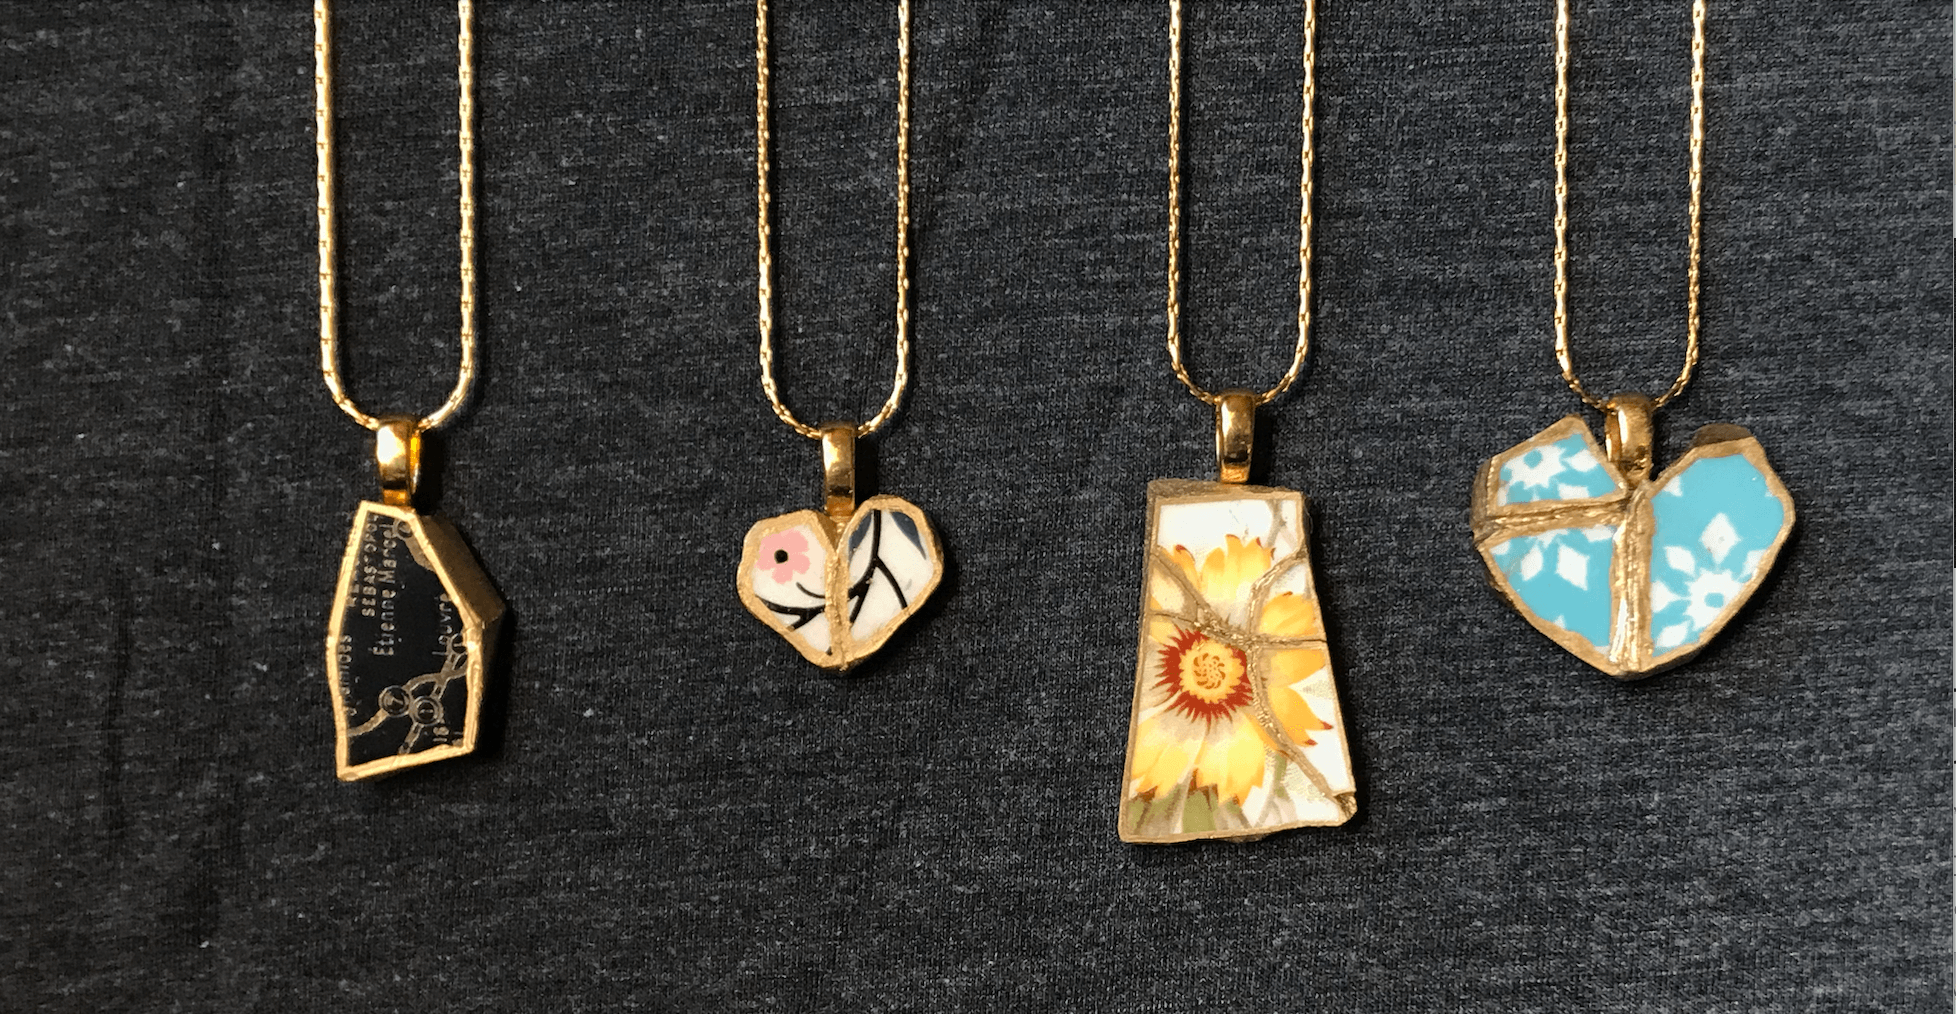 Four necklaces hanging in a row, all made of varying colors and textures, with cracks that have been fit back together and edged with gold.